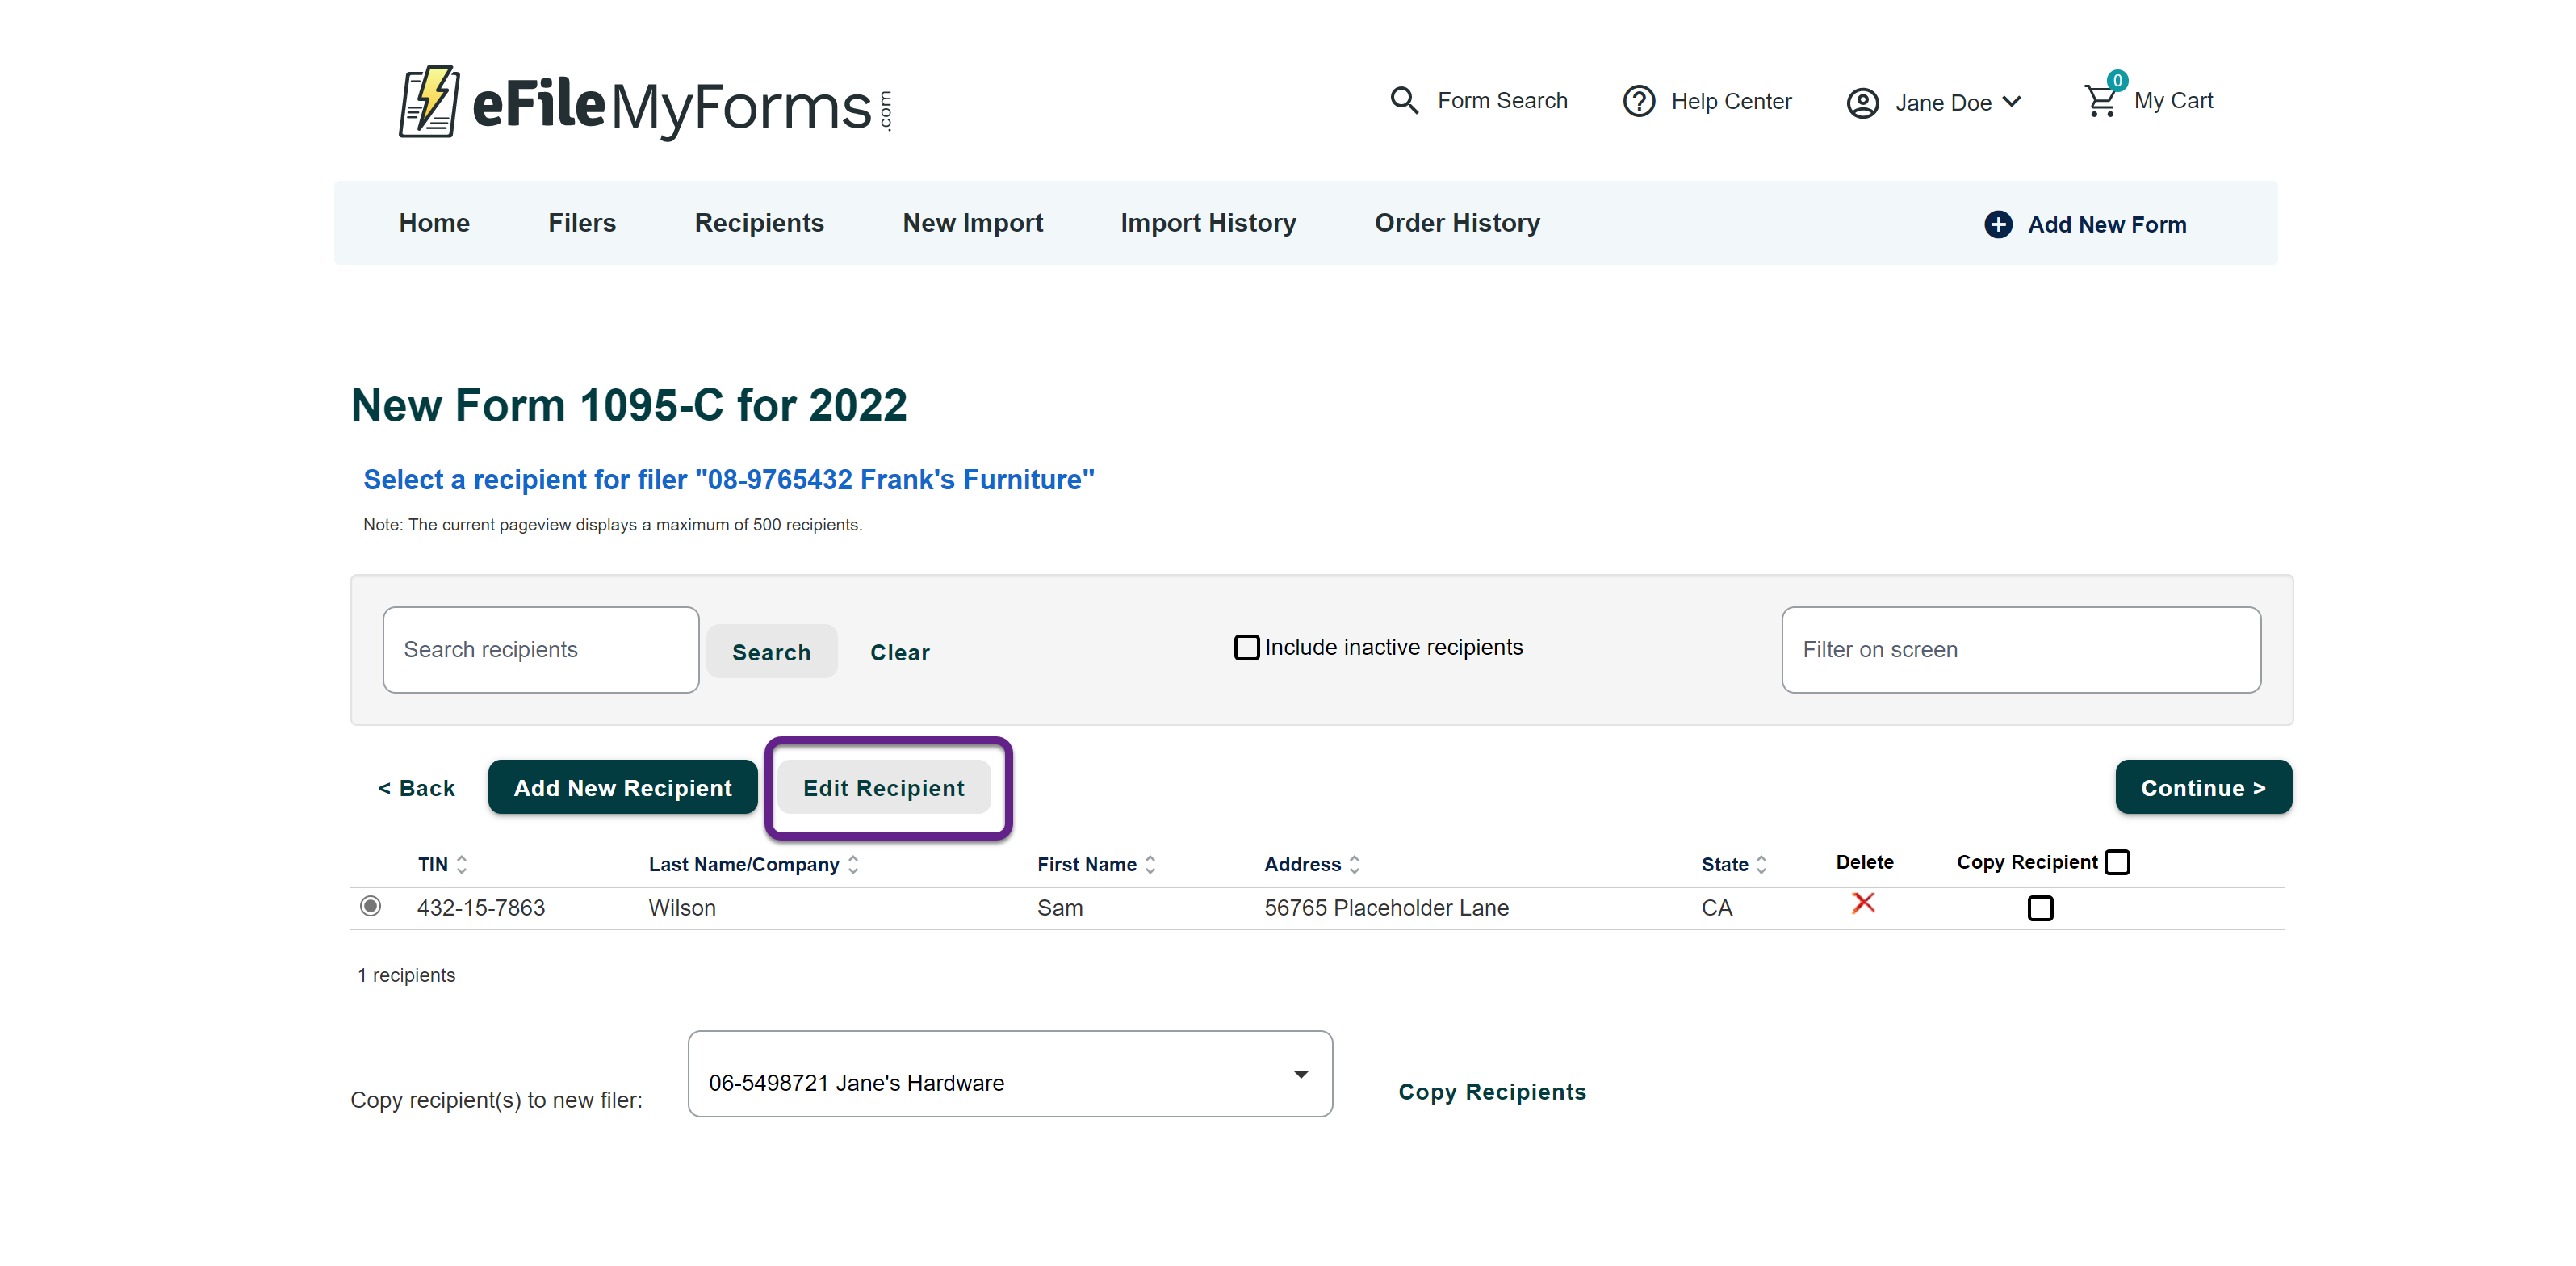 Image of the New Form page with a callout on the Edit Recipient button.